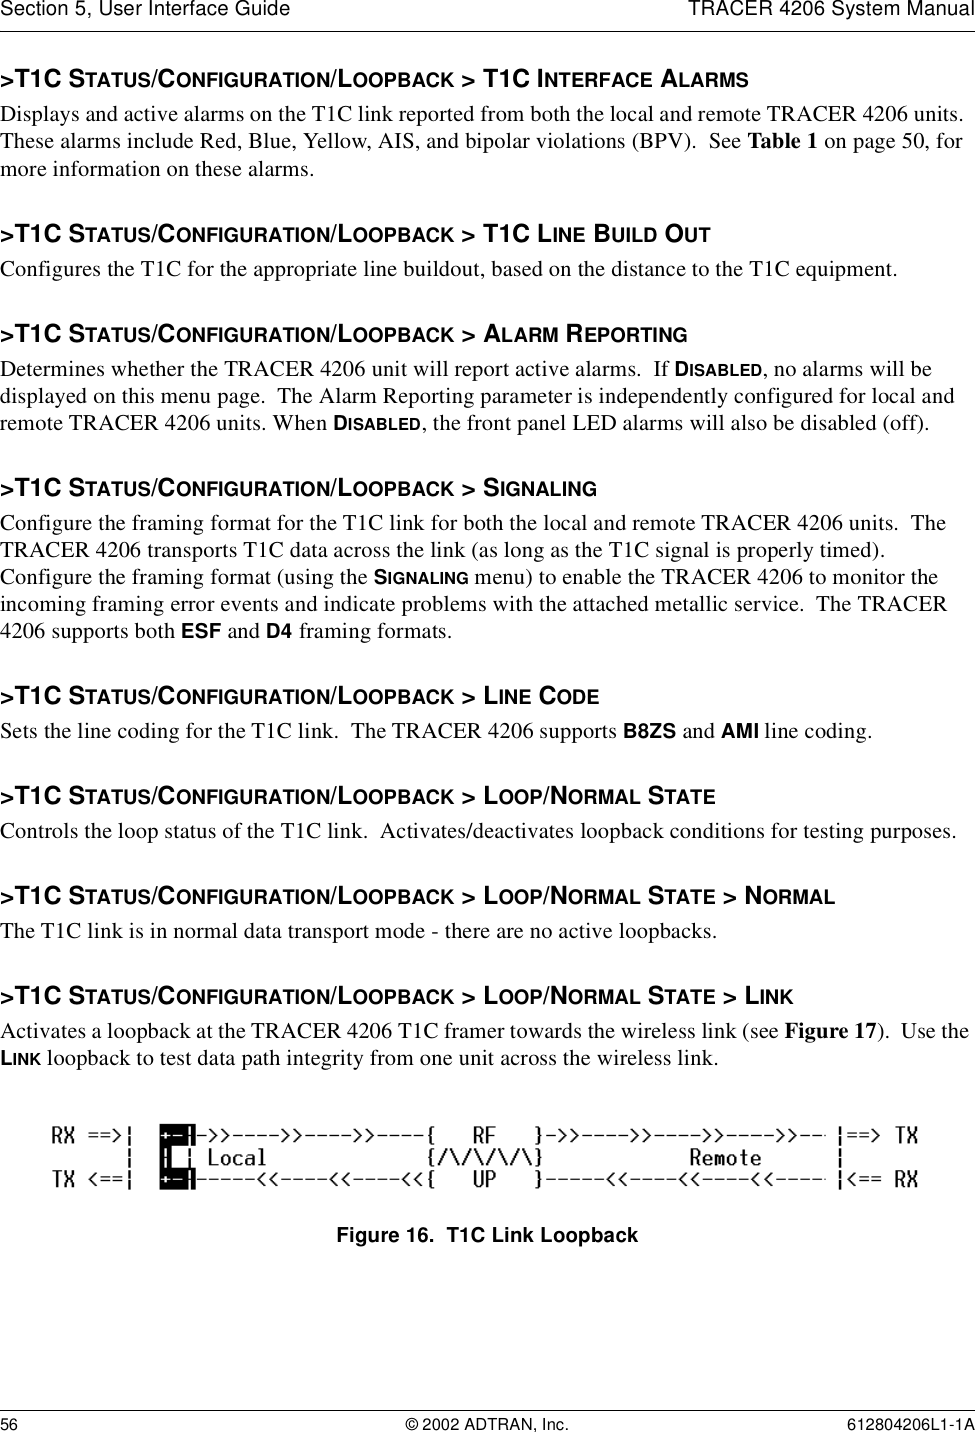 Section 5, User Interface Guide TRACER 4206 System Manual56 © 2002 ADTRAN, Inc. 612804206L1-1A&gt;T1C STATUS/CONFIGURATION/LOOPBACK &gt; T1C INTERFACE ALARMSDisplays and active alarms on the T1C link reported from both the local and remote TRACER 4206 units.  These alarms include Red, Blue, Yellow, AIS, and bipolar violations (BPV).  See Table 1 on page 50, for more information on these alarms.&gt;T1C STATUS/CONFIGURATION/LOOPBACK &gt; T1C LINE BUILD OUTConfigures the T1C for the appropriate line buildout, based on the distance to the T1C equipment. &gt;T1C STATUS/CONFIGURATION/LOOPBACK &gt; ALARM REPORTINGDetermines whether the TRACER 4206 unit will report active alarms.  If DISABLED, no alarms will be displayed on this menu page.  The Alarm Reporting parameter is independently configured for local and remote TRACER 4206 units. When DISABLED, the front panel LED alarms will also be disabled (off).&gt;T1C STATUS/CONFIGURATION/LOOPBACK &gt; SIGNALINGConfigure the framing format for the T1C link for both the local and remote TRACER 4206 units.  The TRACER 4206 transports T1C data across the link (as long as the T1C signal is properly timed).  Configure the framing format (using the SIGNALING menu) to enable the TRACER 4206 to monitor the incoming framing error events and indicate problems with the attached metallic service.  The TRACER 4206 supports both ESF and D4 framing formats.&gt;T1C STATUS/CONFIGURATION/LOOPBACK &gt; LINE CODESets the line coding for the T1C link.  The TRACER 4206 supports B8ZS and AMI line coding.&gt;T1C STATUS/CONFIGURATION/LOOPBACK &gt; LOOP/NORMAL STATEControls the loop status of the T1C link.  Activates/deactivates loopback conditions for testing purposes.&gt;T1C STATUS/CONFIGURATION/LOOPBACK &gt; LOOP/NORMAL STATE &gt; NORMALThe T1C link is in normal data transport mode - there are no active loopbacks.&gt;T1C STATUS/CONFIGURATION/LOOPBACK &gt; LOOP/NORMAL STATE &gt; LINKActivates a loopback at the TRACER 4206 T1C framer towards the wireless link (see Figure 17).  Use the LINK loopback to test data path integrity from one unit across the wireless link.Figure 16.  T1C Link Loopback